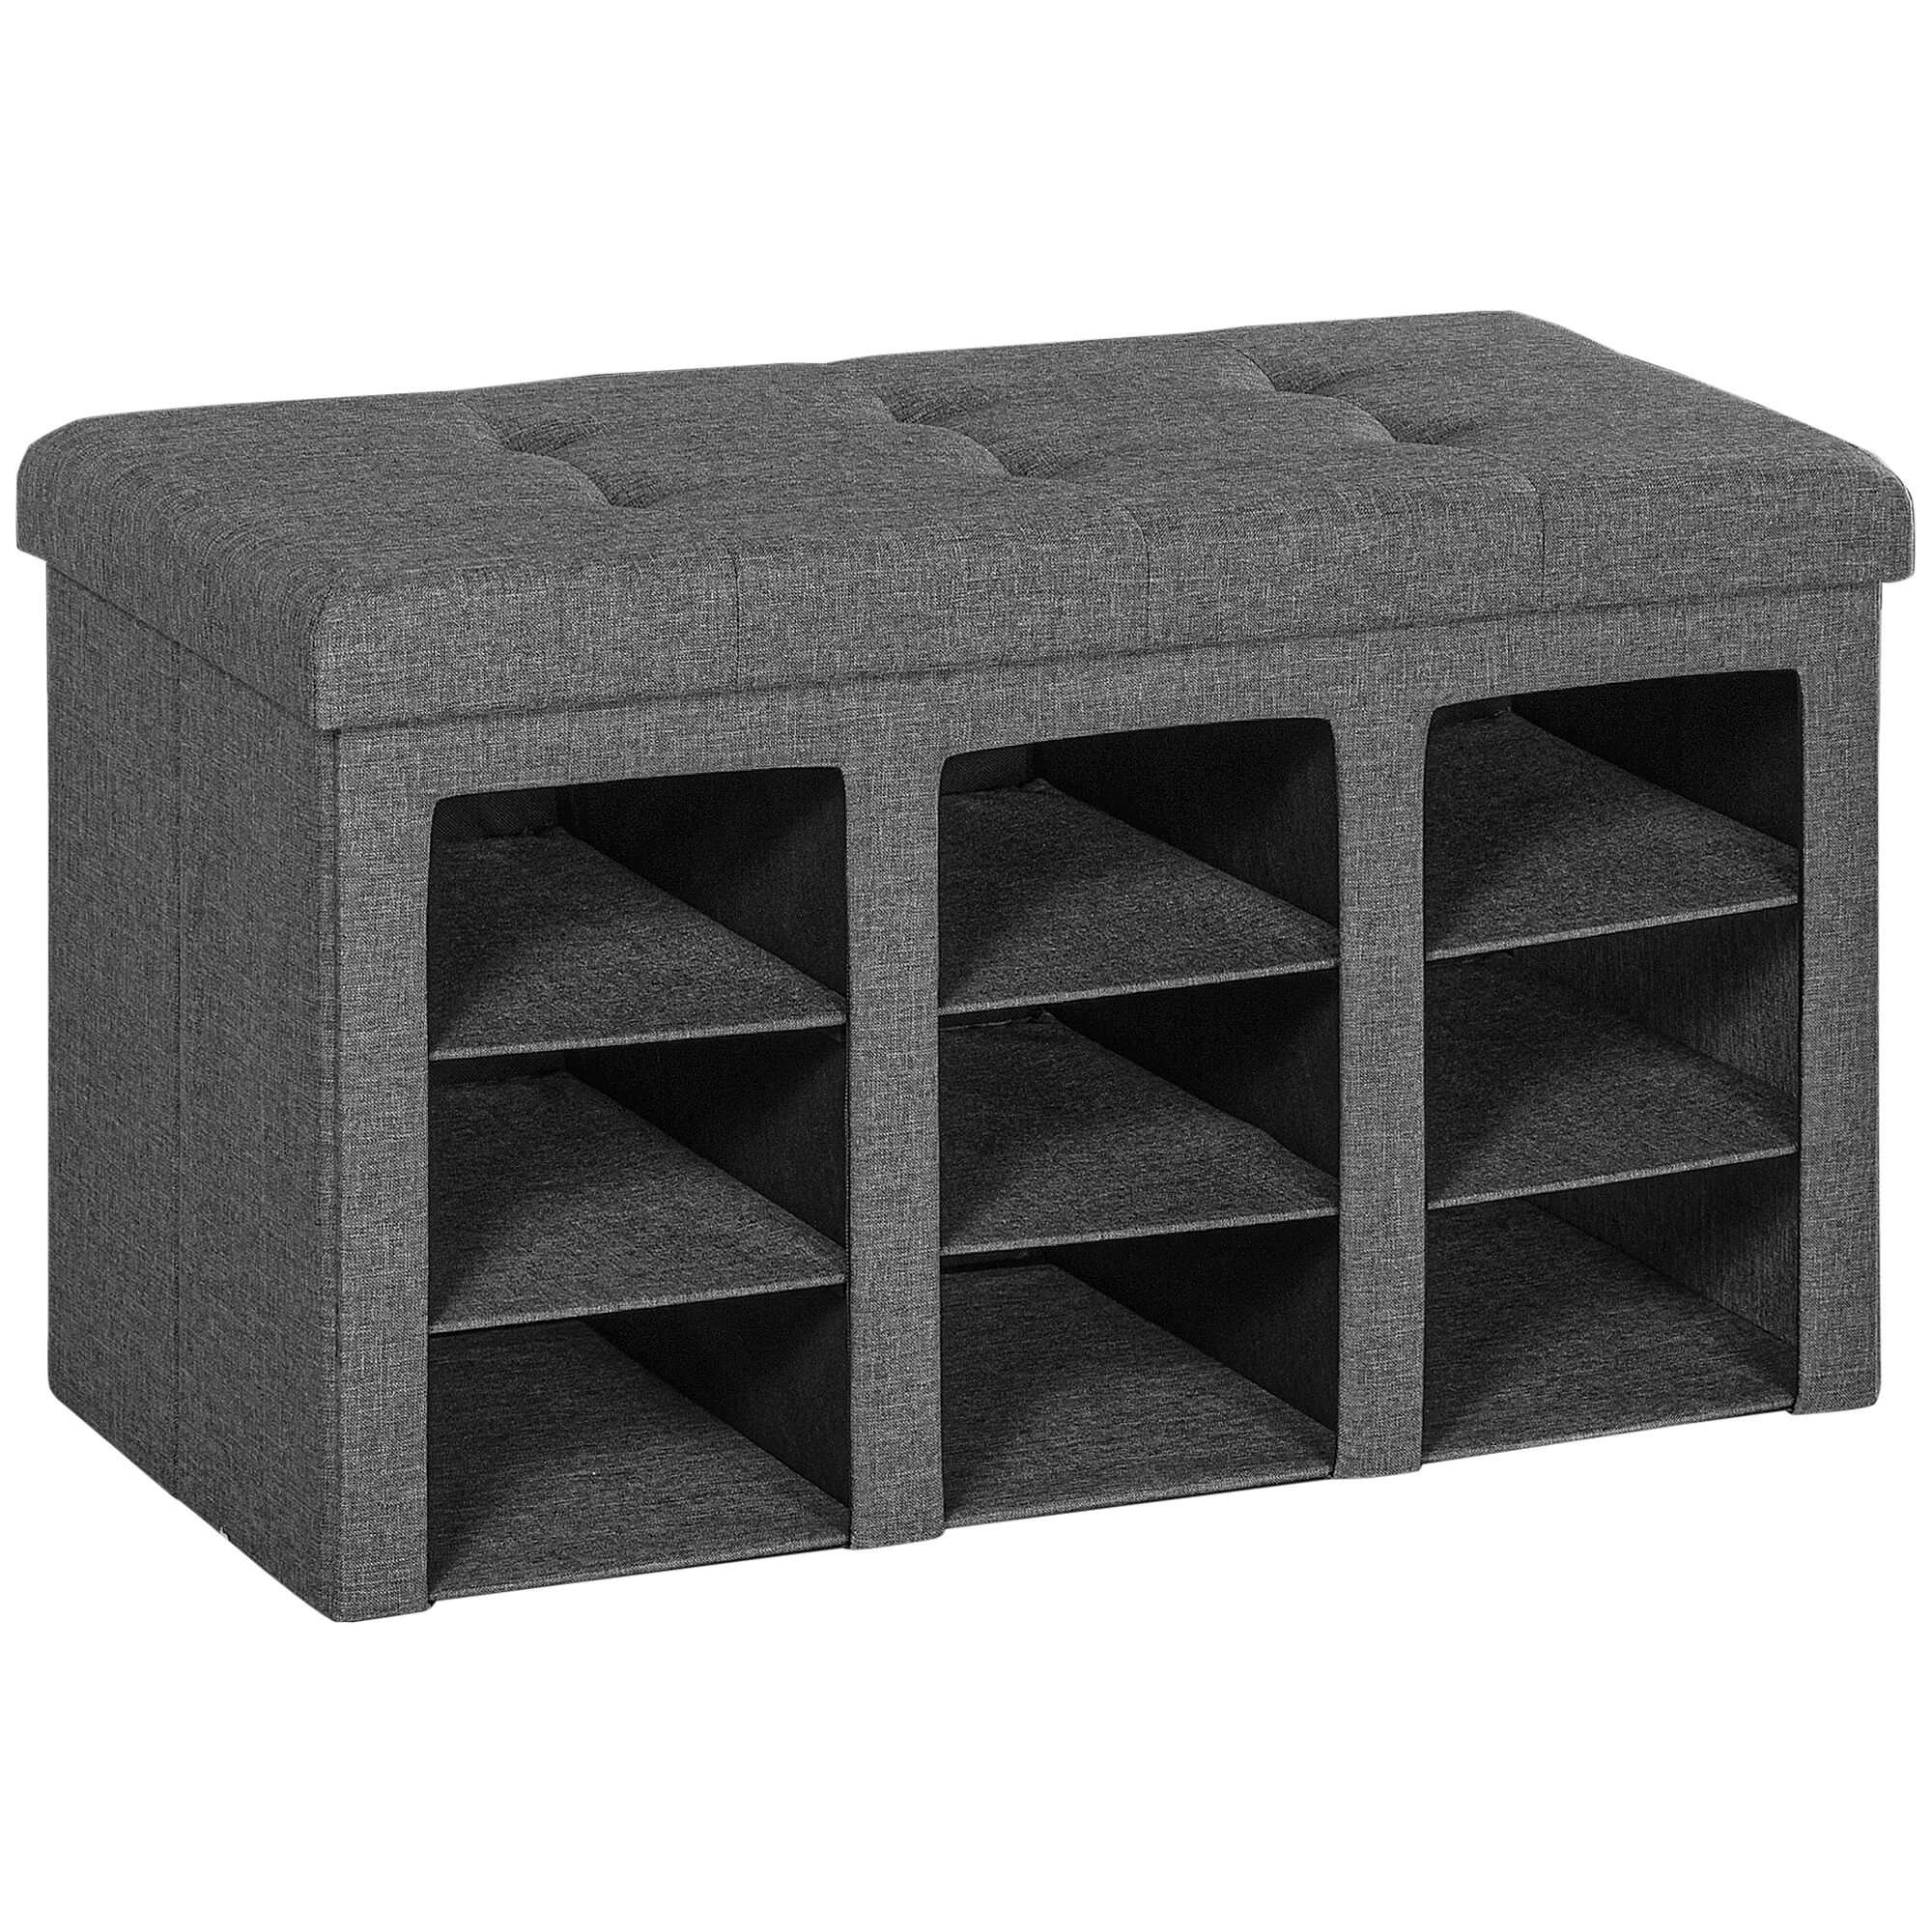 HOMCOM Folding Ottoman Bench with Storage Cubes Grey Padded Seat Foot Rest for Bedroom Hallway 9 Compartments   Aosom.com